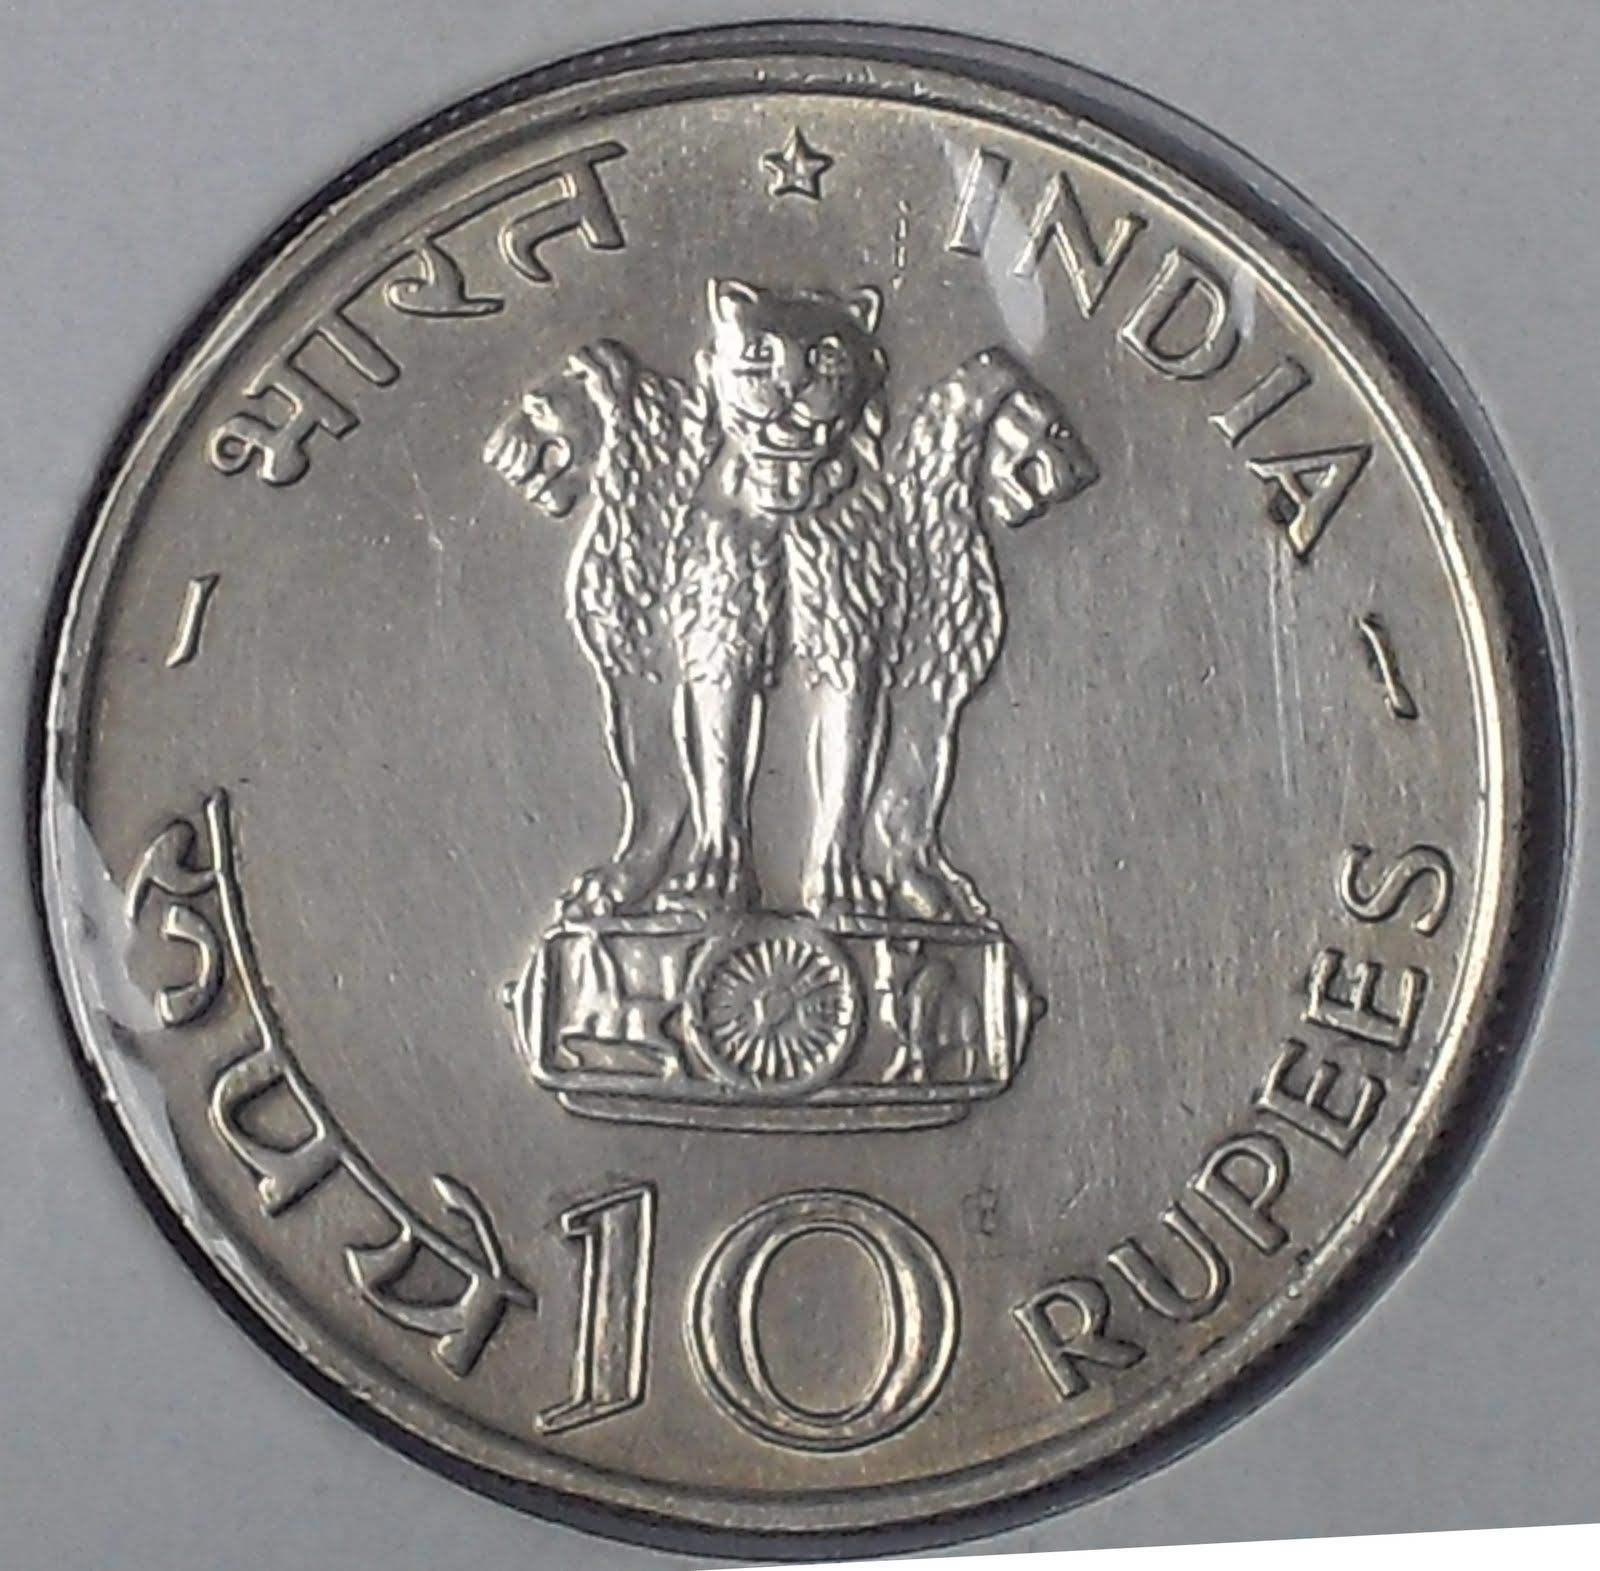 Commemorative Coins - 10 Rupees - Page 1 - JJ Collection